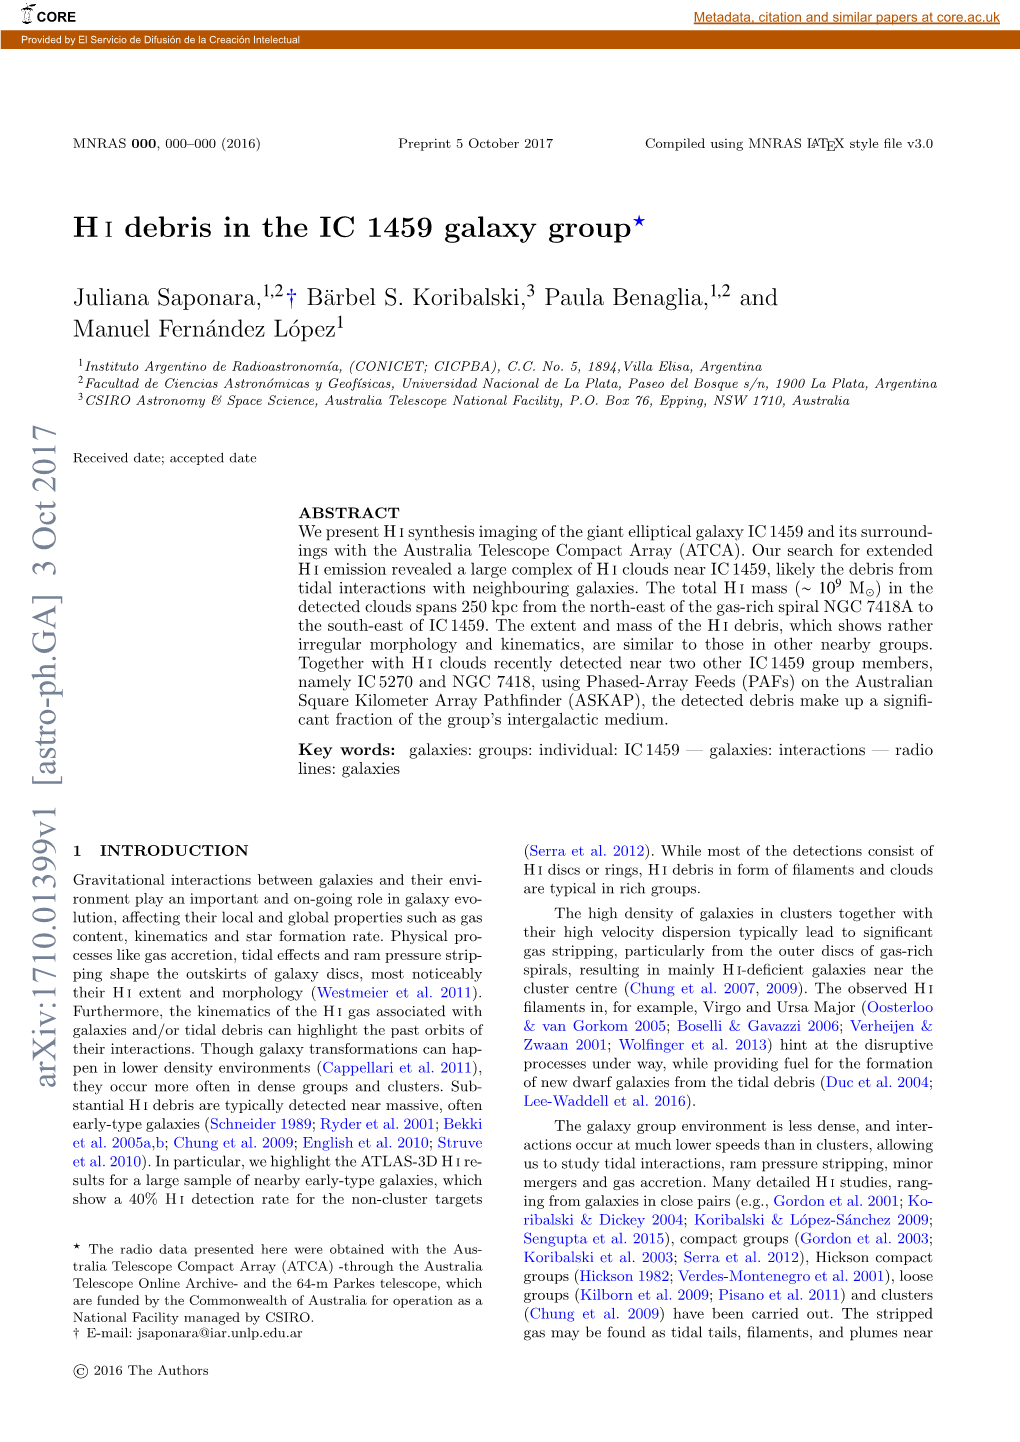 Arxiv:1710.01399V1 [Astro-Ph.GA] 3 Oct 2017 They Occur More Often in Dense Groups and Clusters